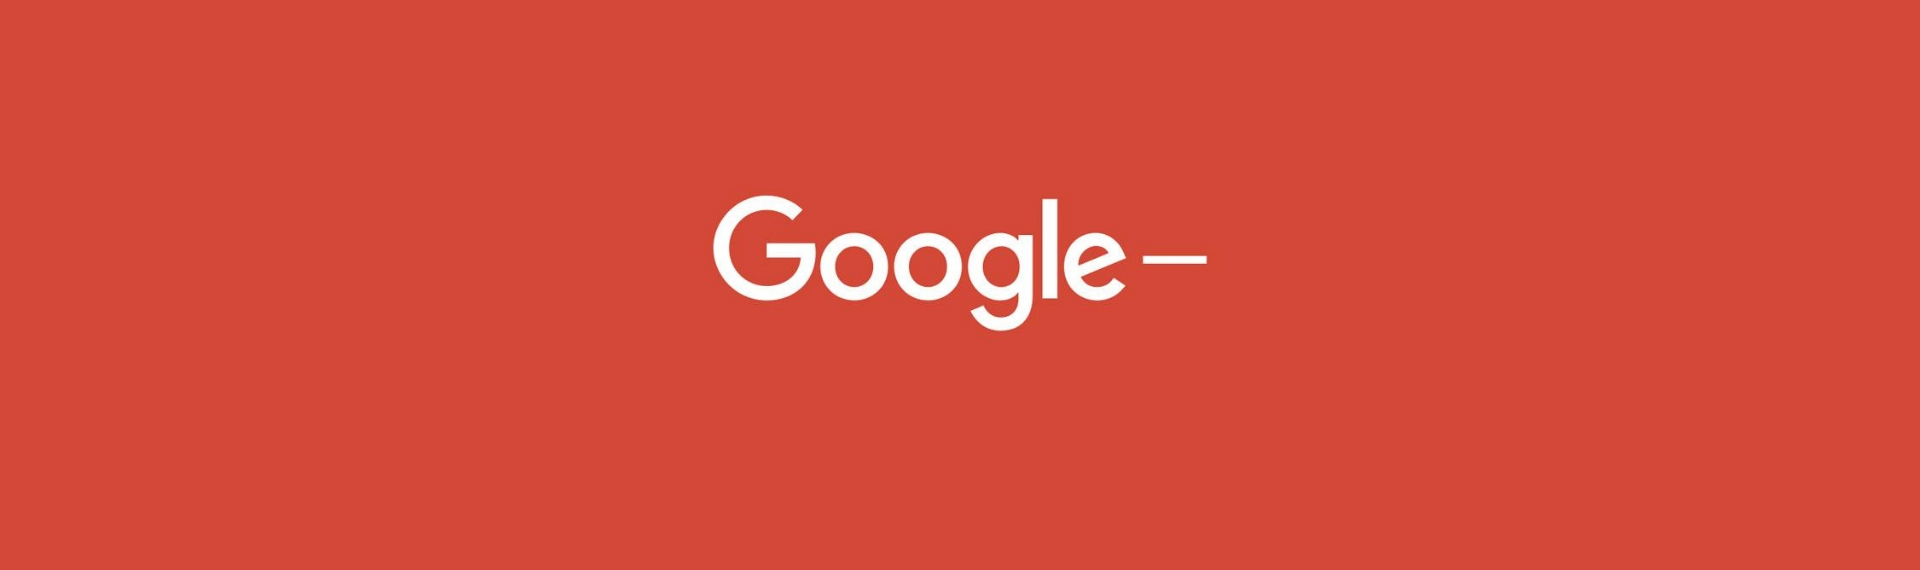 Google+ is Officially Shutting Down on April 2nd